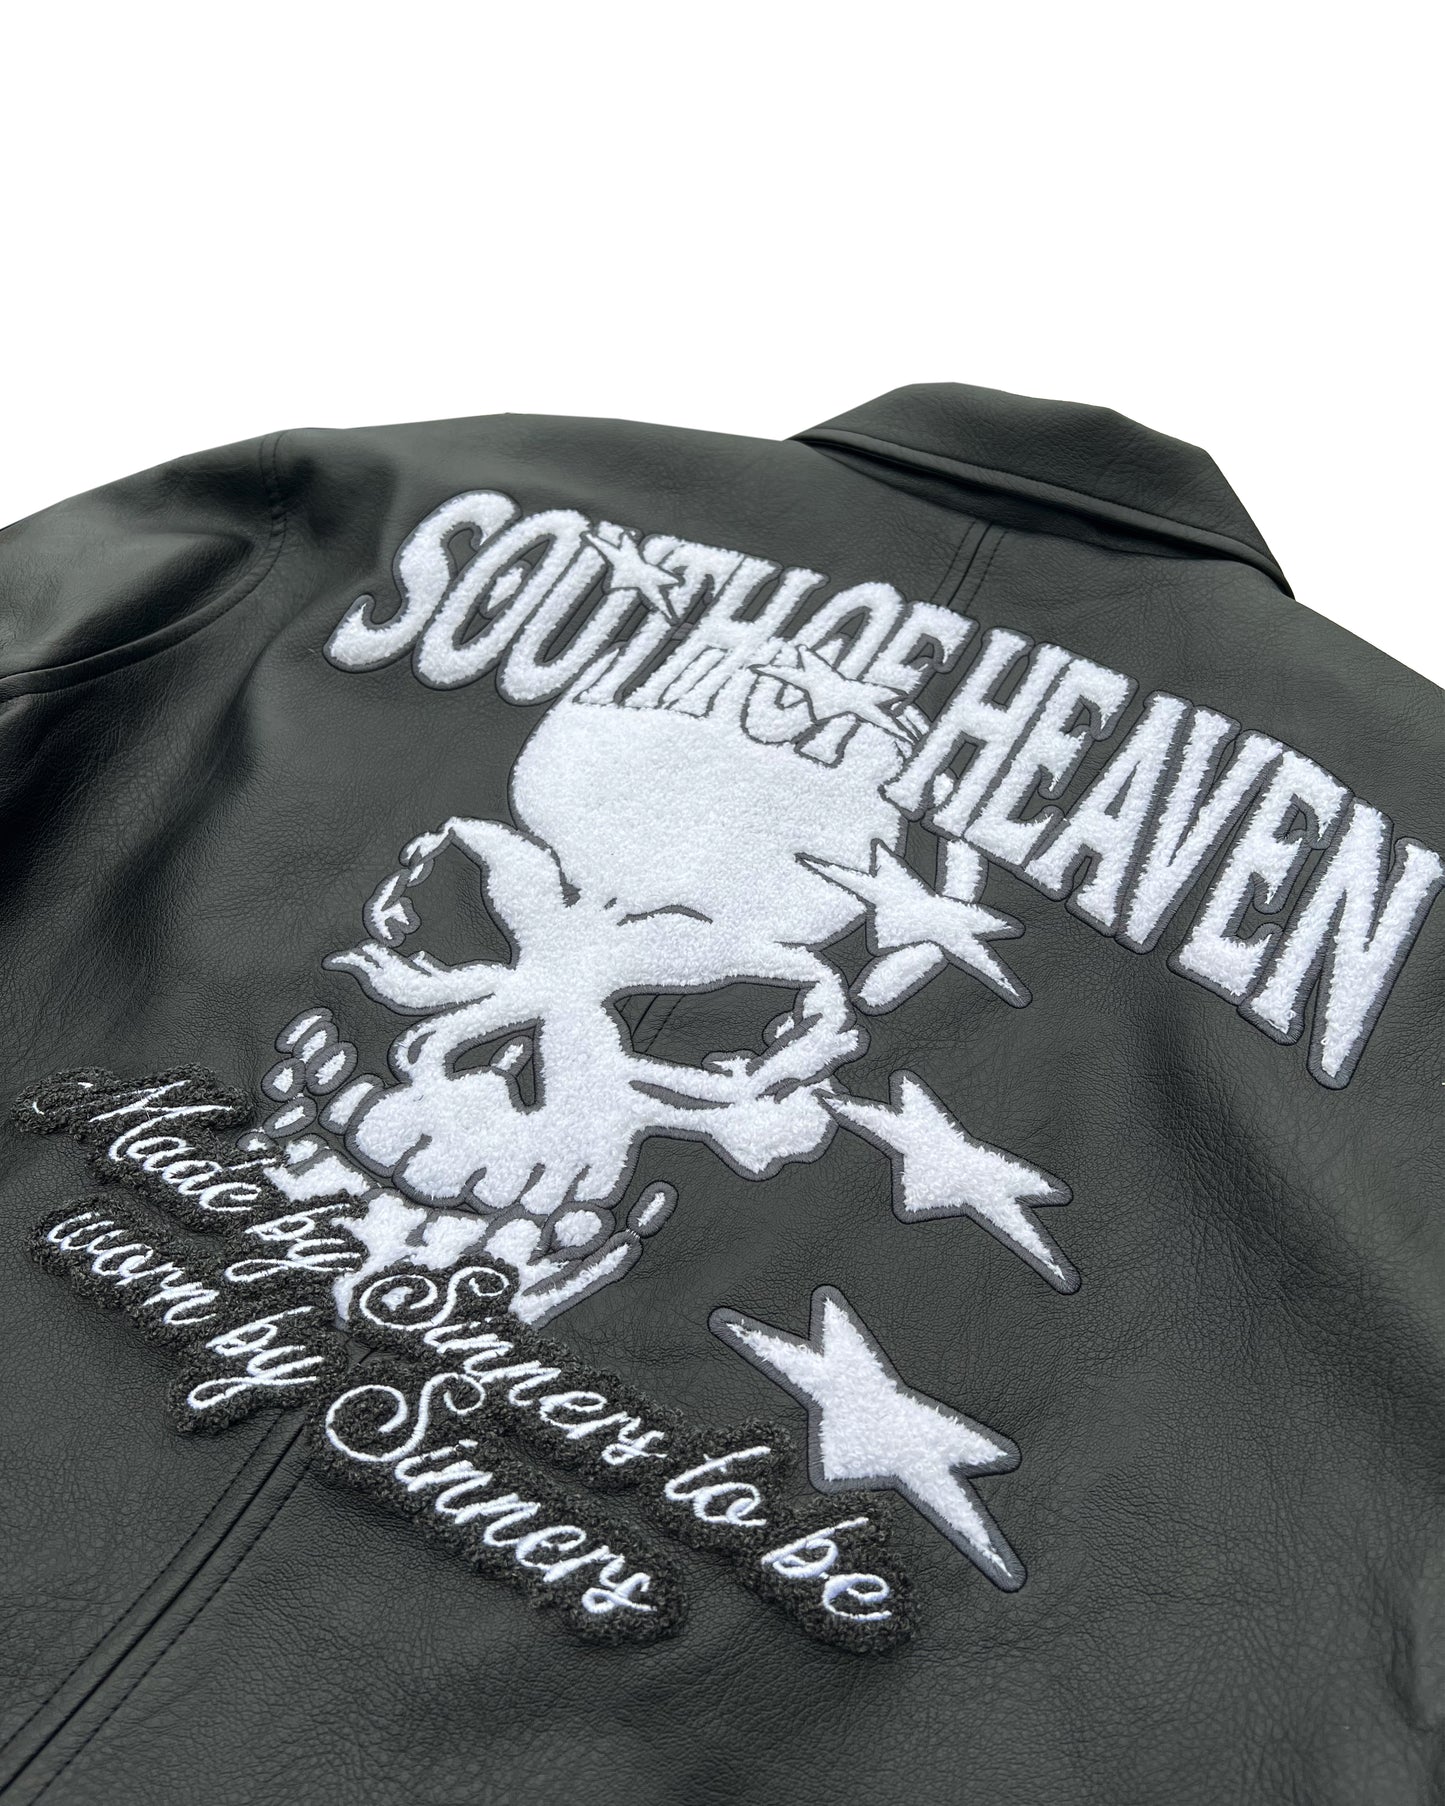 NORTH OF HELL - Vegan Leather Jacket